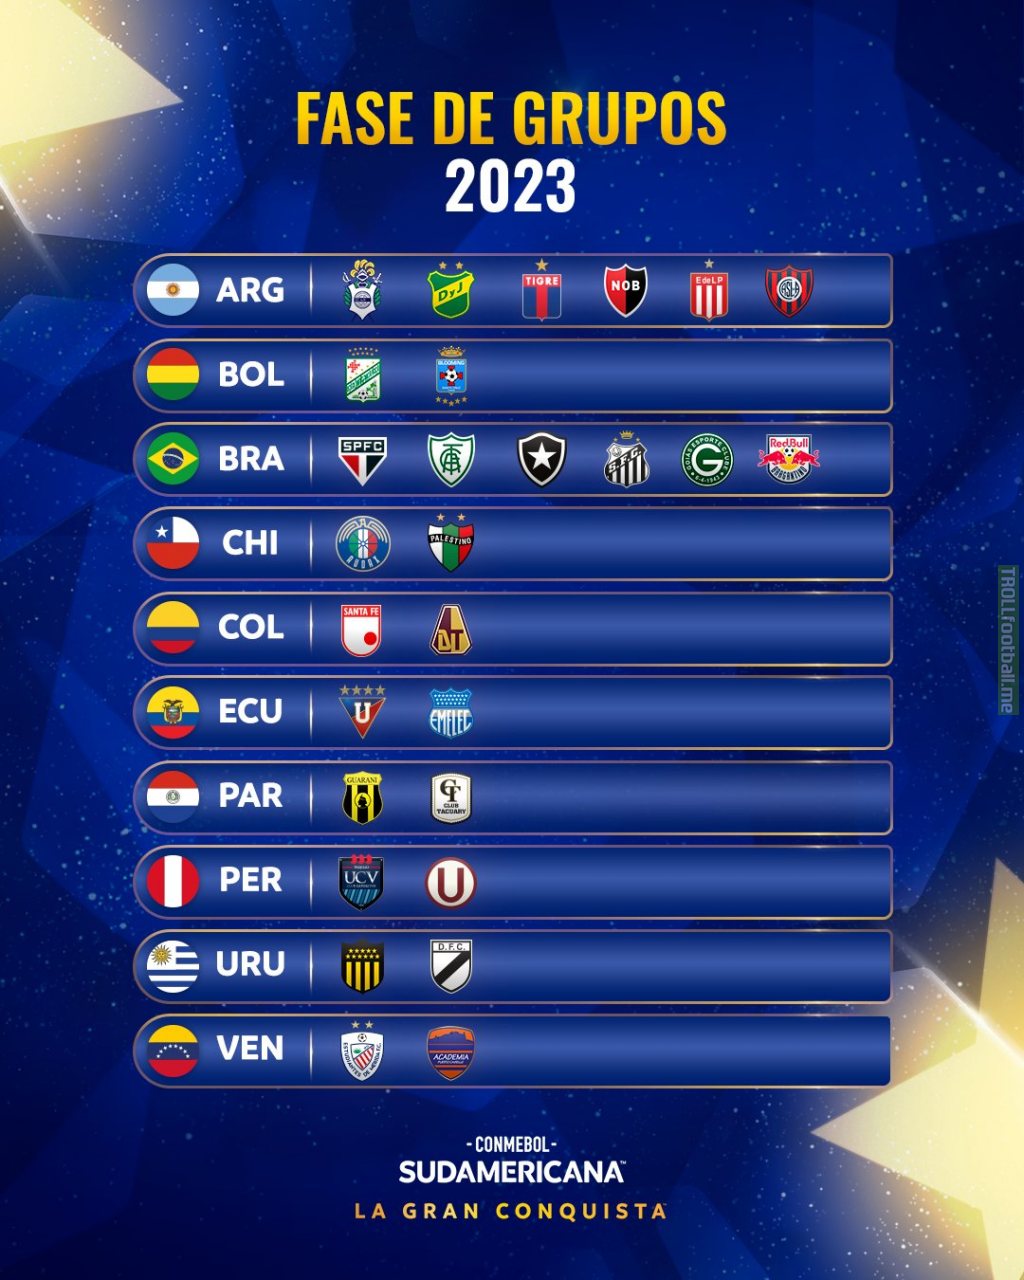 Copa Sudamericana: 28 of the 32 teams qualified to the group stage have been confirmed. The remaining four spots will go to the teams that get knocked out of the Copa Libertadores stage 3.